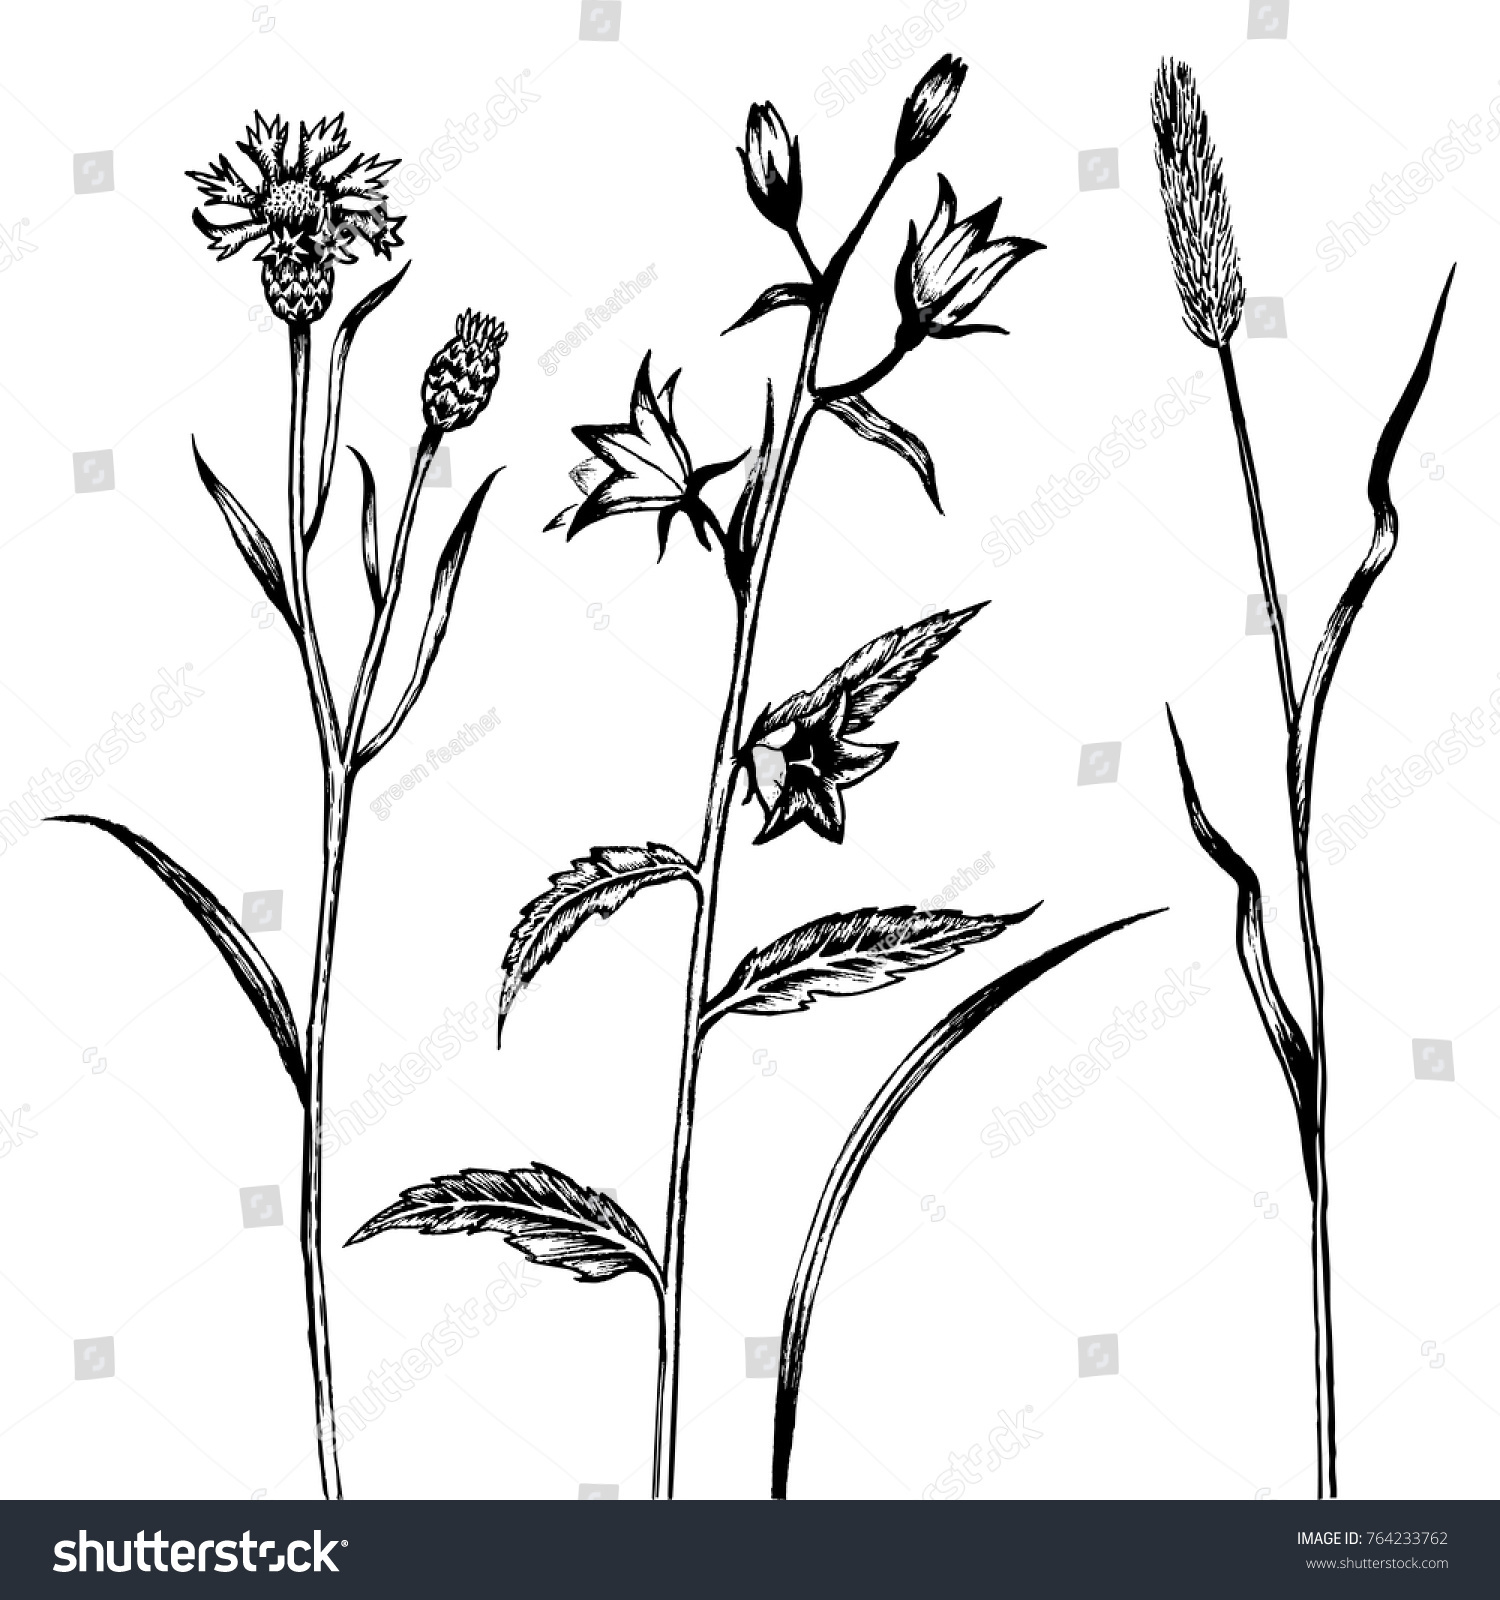 Wildflowers Graphic Drawing Indian Ink Pen Stock Vector 764233762 ...